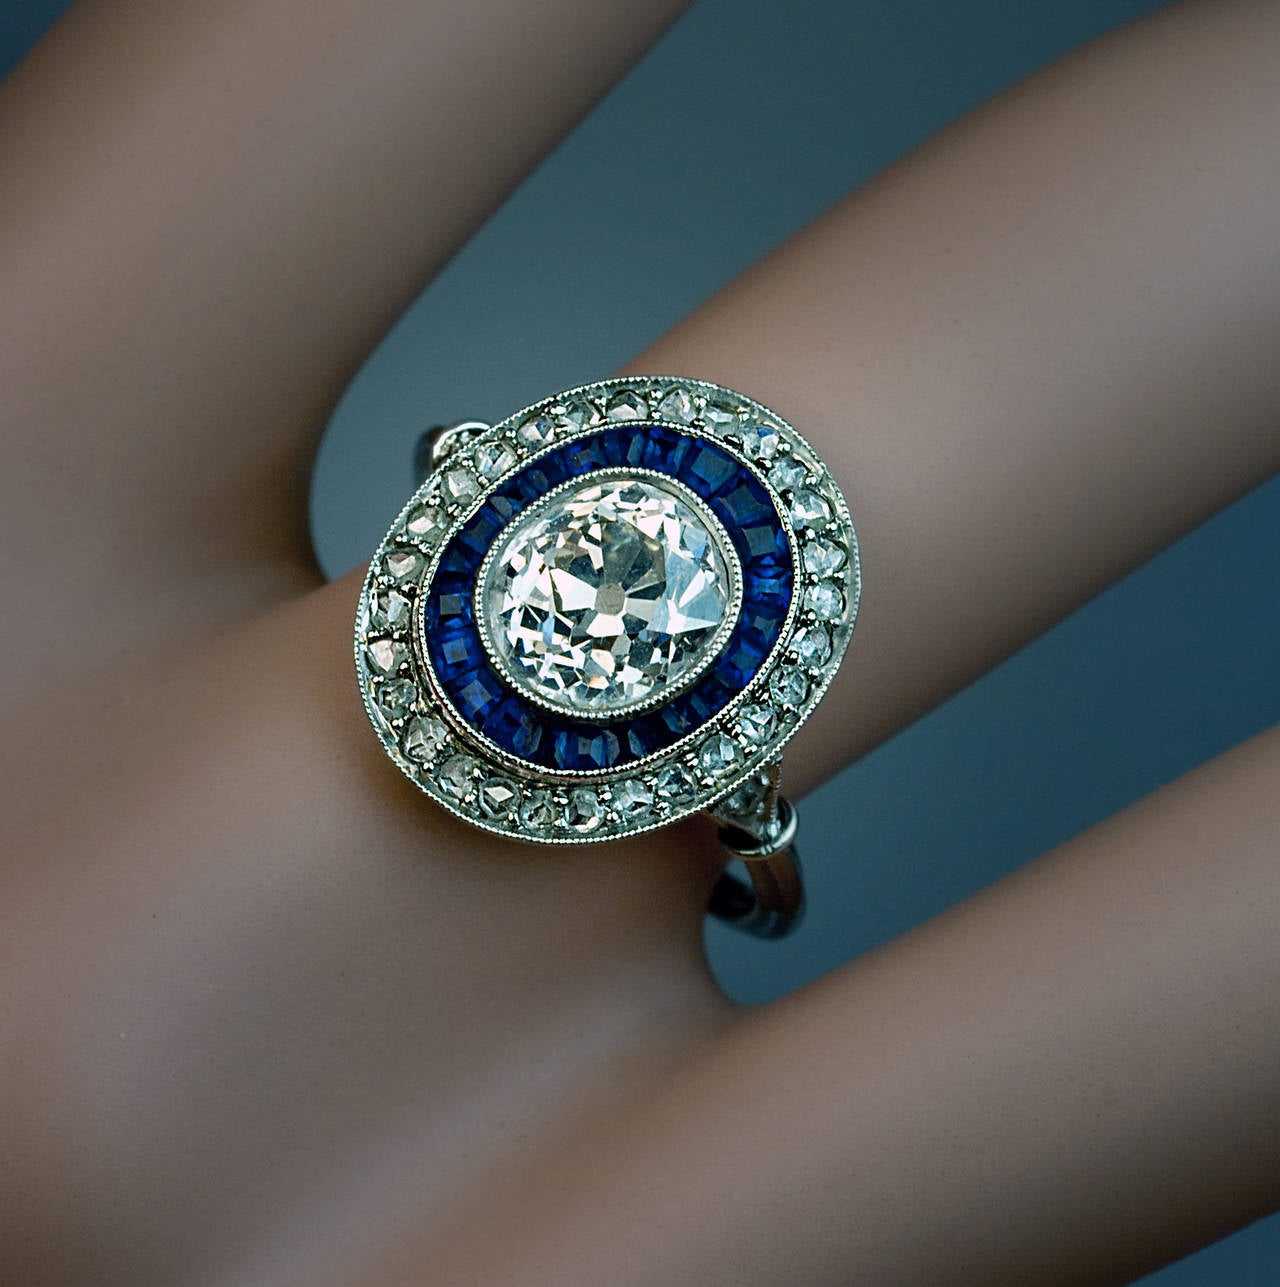 A platinum milgrain ring of an oval shape centered with a bezel set sparkling antique cushion cut diamond (7.3 x 6.8 x 4.85 mm, approximately 2 carats, K color, VS2 clarity) outlined by a row of tapered calibre cut deep blue sapphires and further